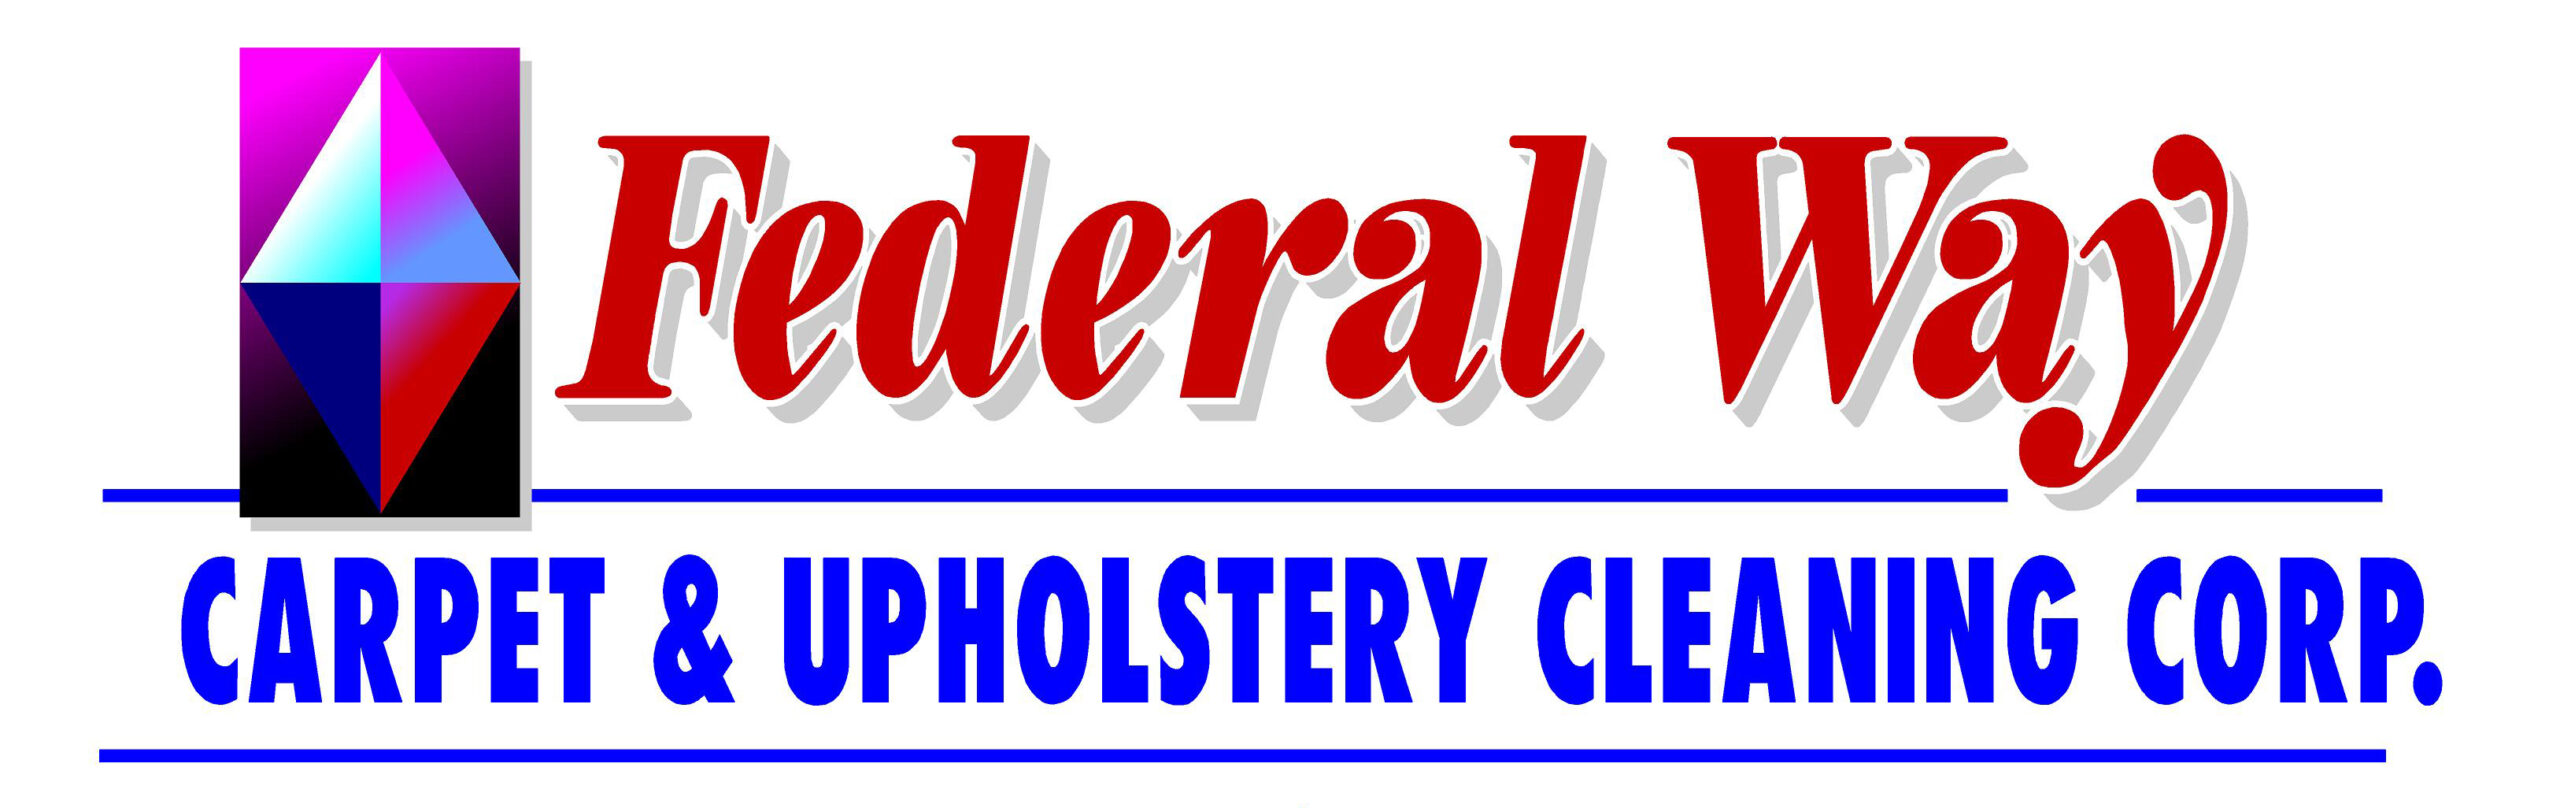 Carpet & Upholstery Cleaning Federal Way